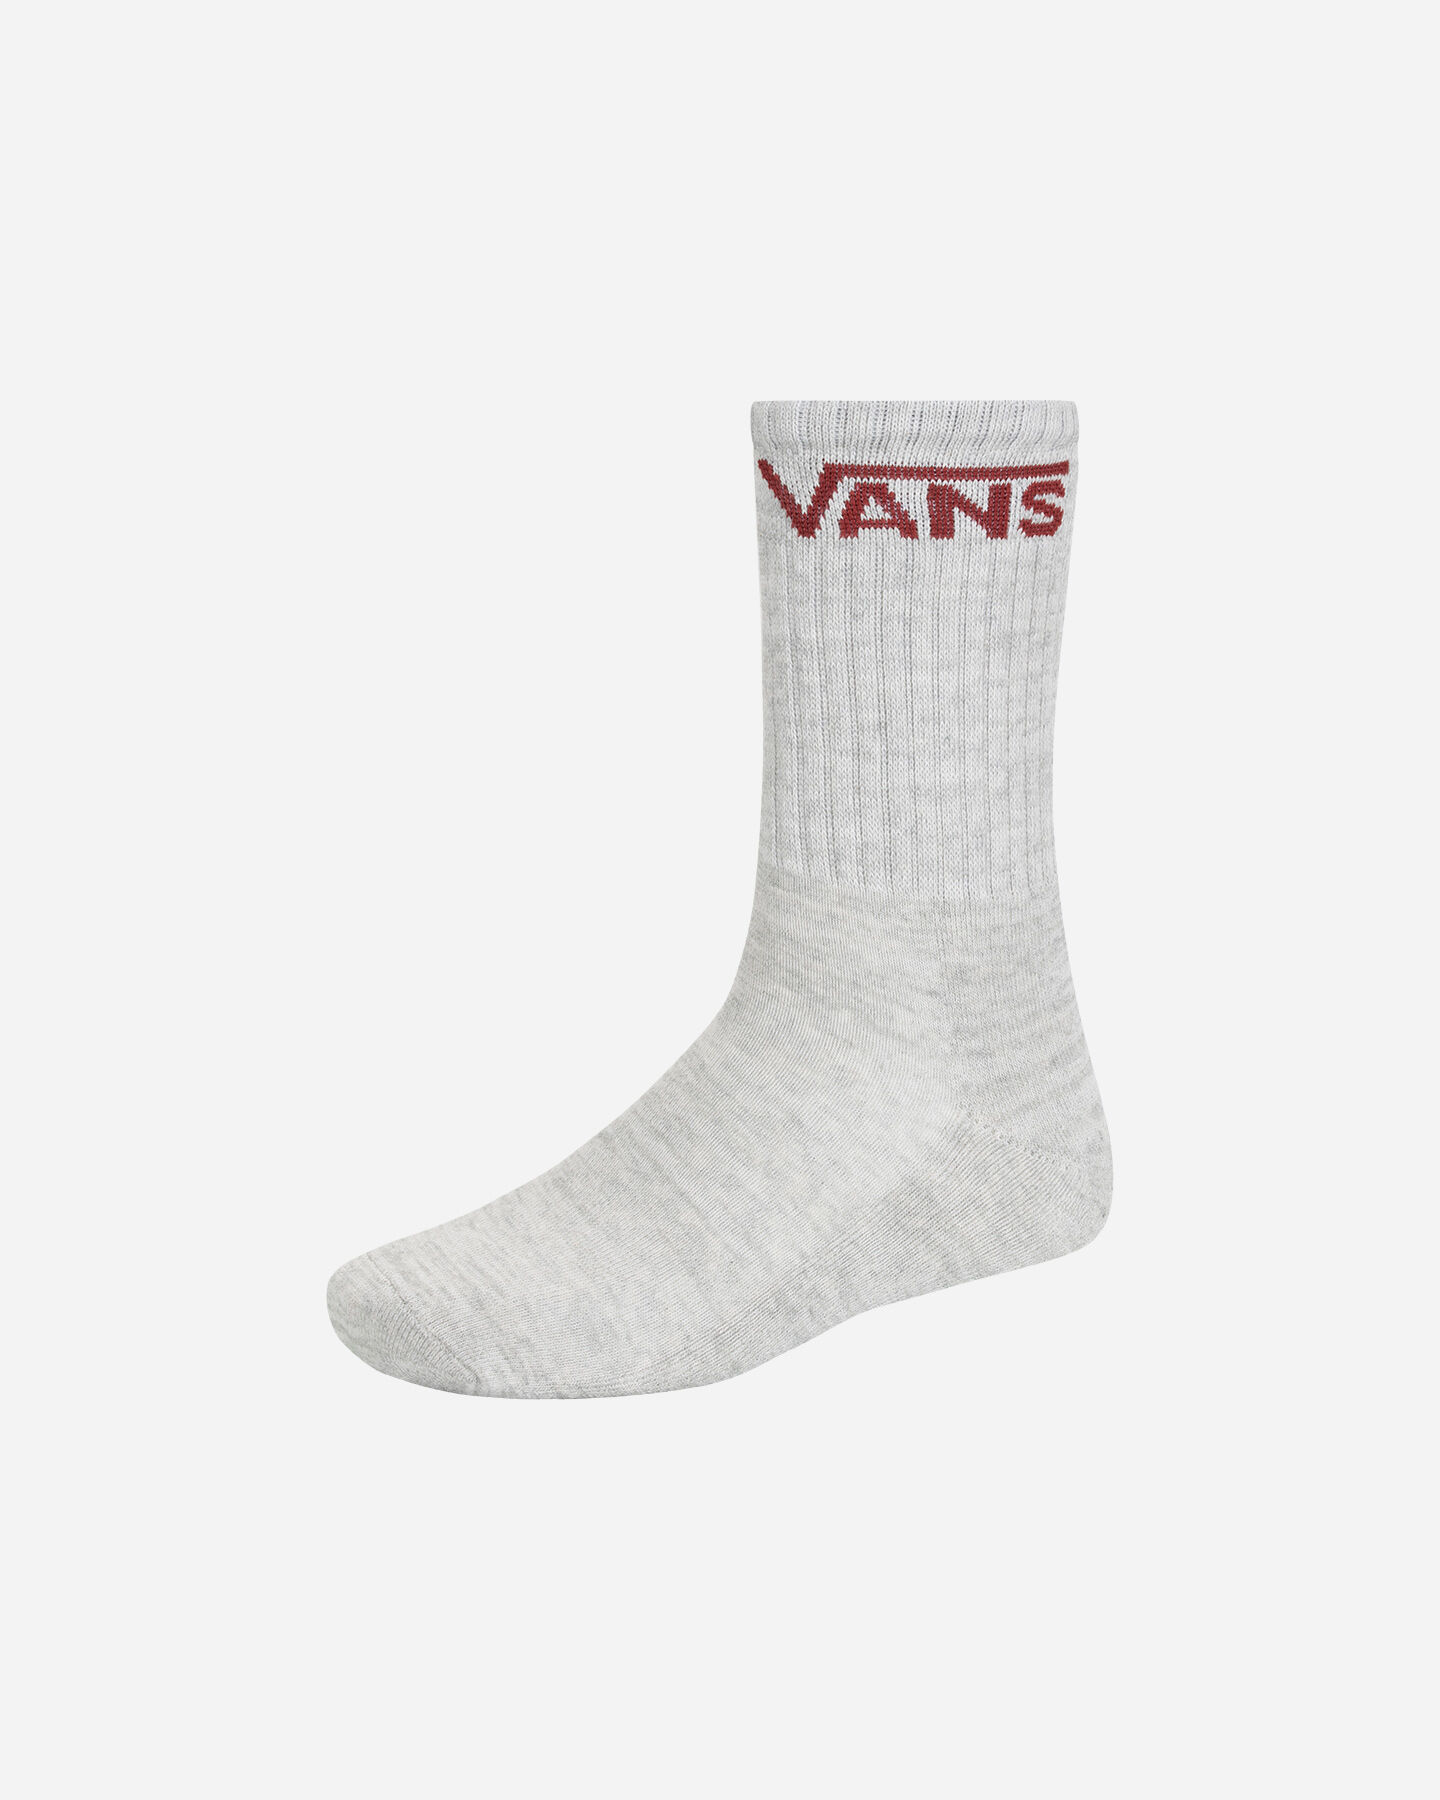  Calze VANS CLASSIC CREW 3PACK M S5556154|07W|OS scatto 1